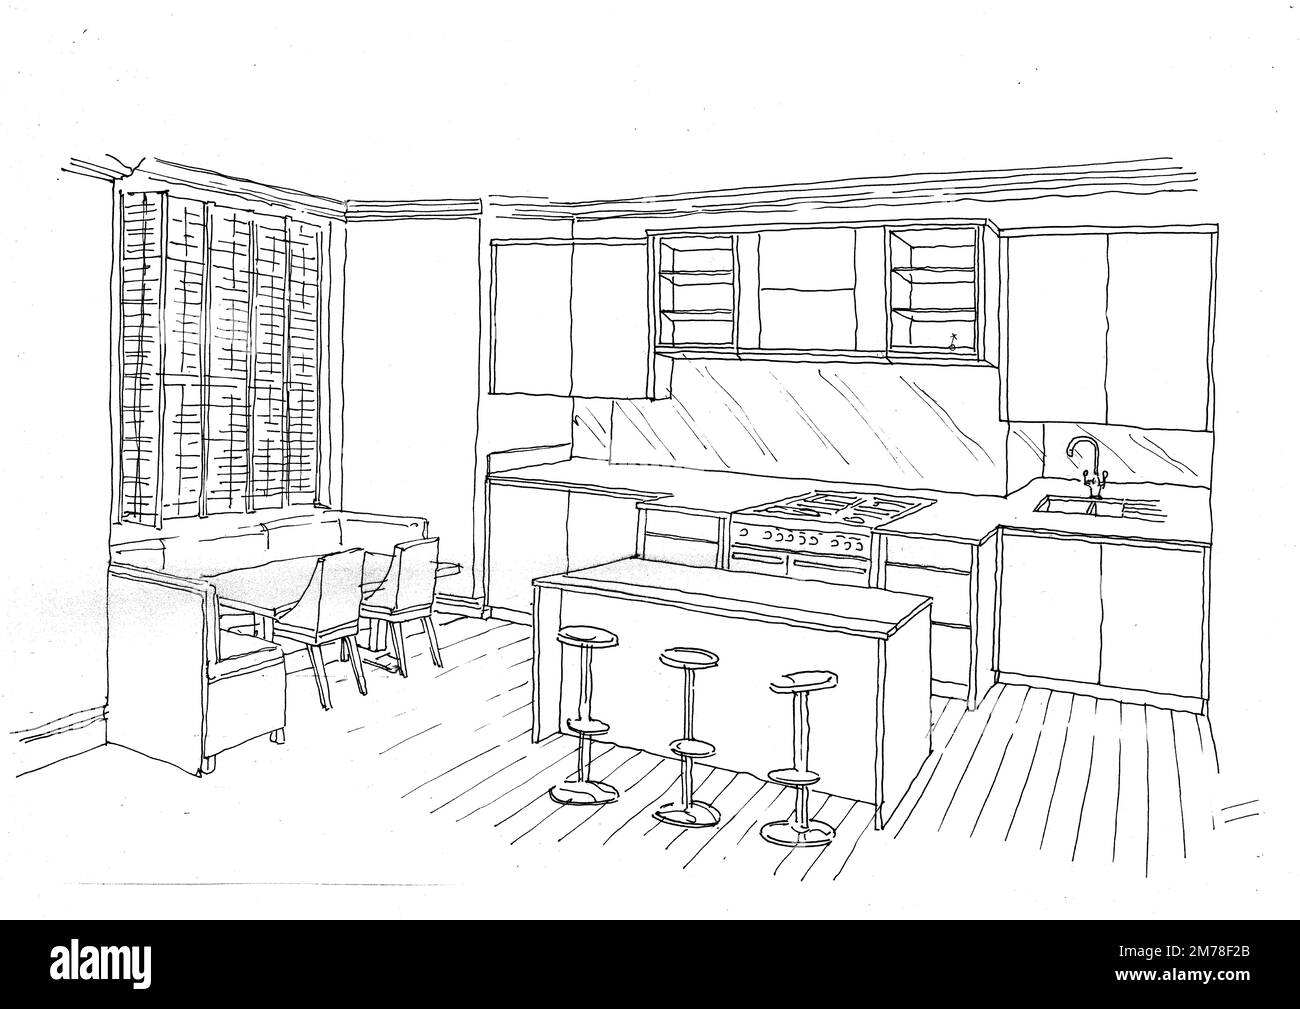 Black and white sketch of a modern style kitchen on a white background. Stock Photo